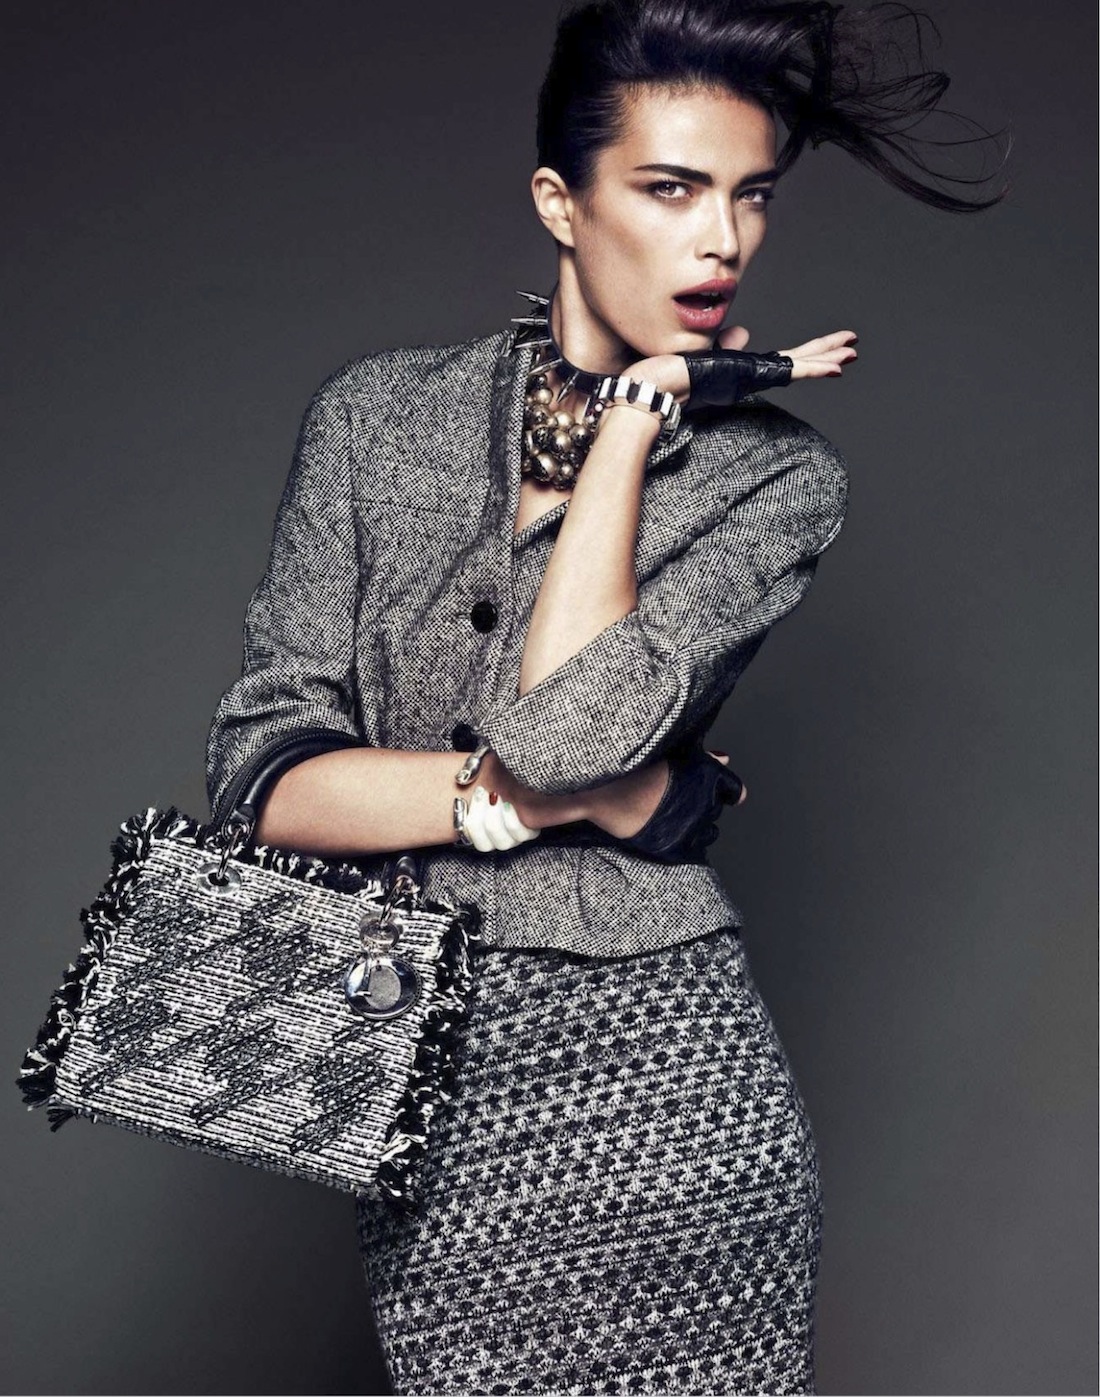 classico glam: marie meyer by jonathan segade for amica november 2012 ...